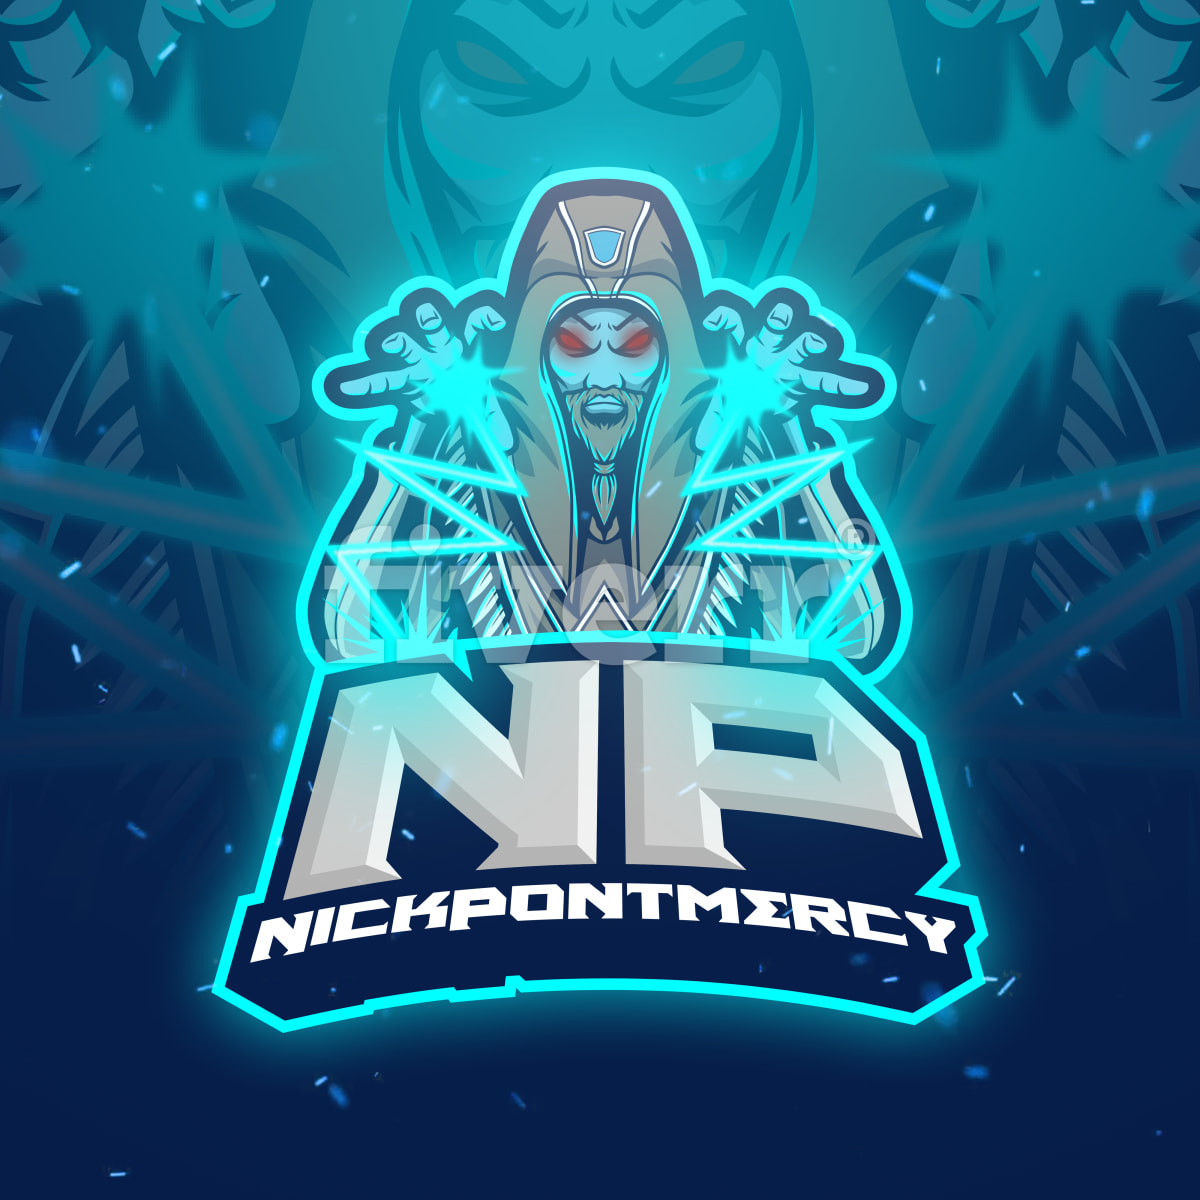 Your very own custom logo for Sports, Esports and Twitch!!!

Get it done on Fiverr with my special 20% OFF Coupon when you register using my link here: ninjalogodesigner.com/snape   

#supportsmallerstreams #gamers